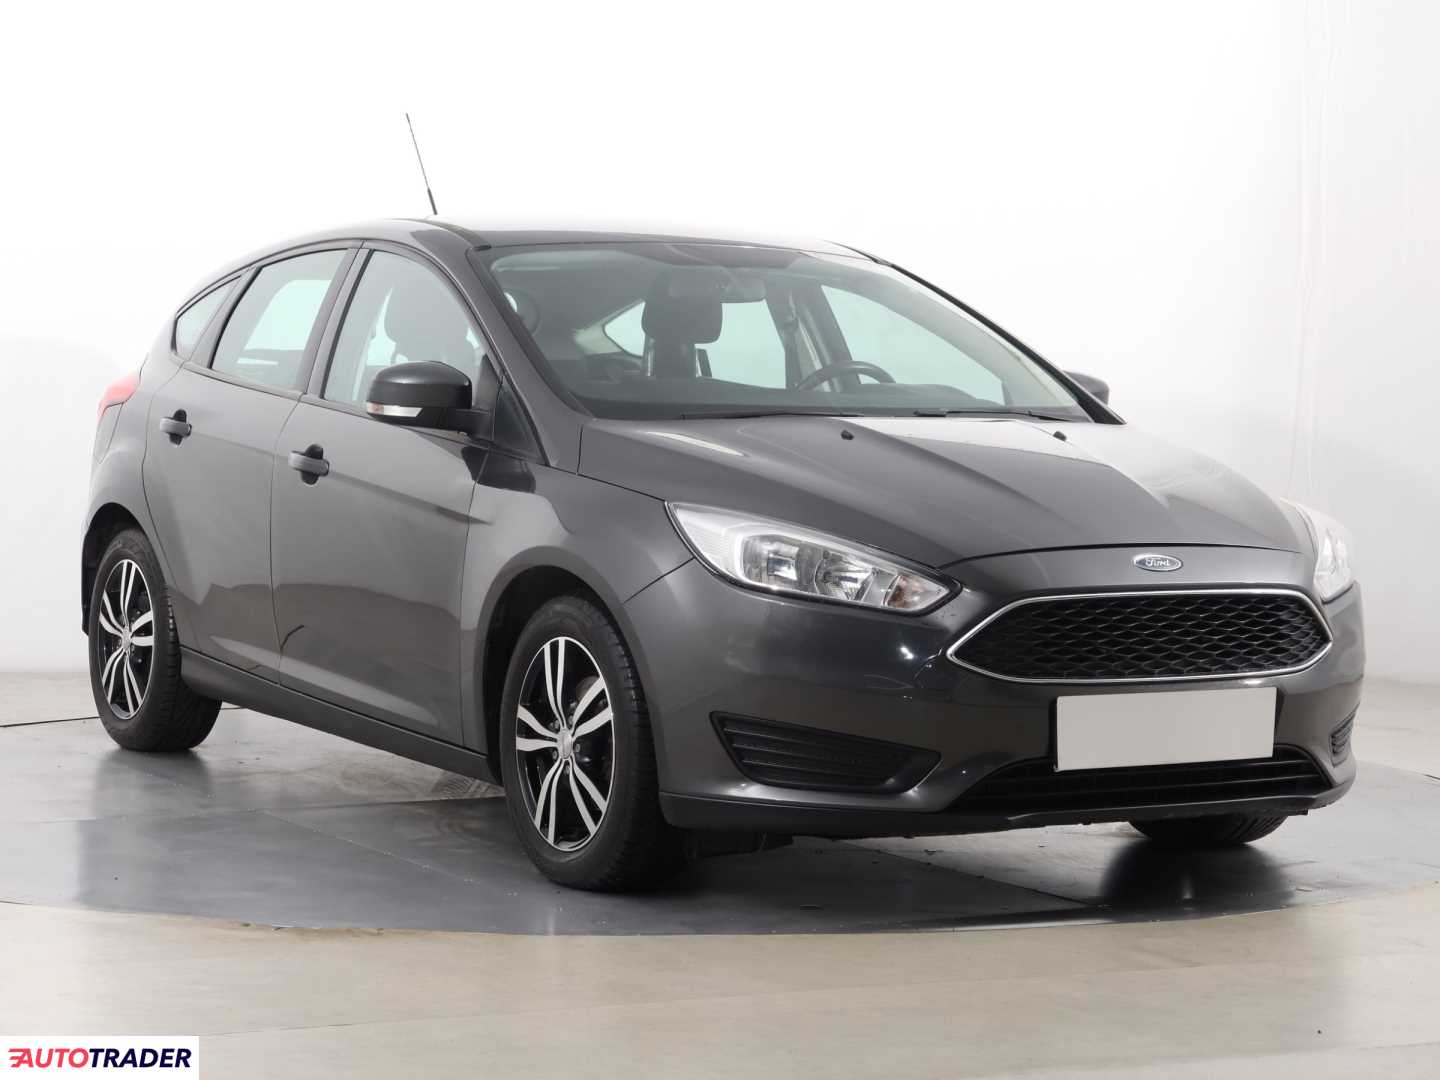 Ford Focus 2015 1.6 103 KM